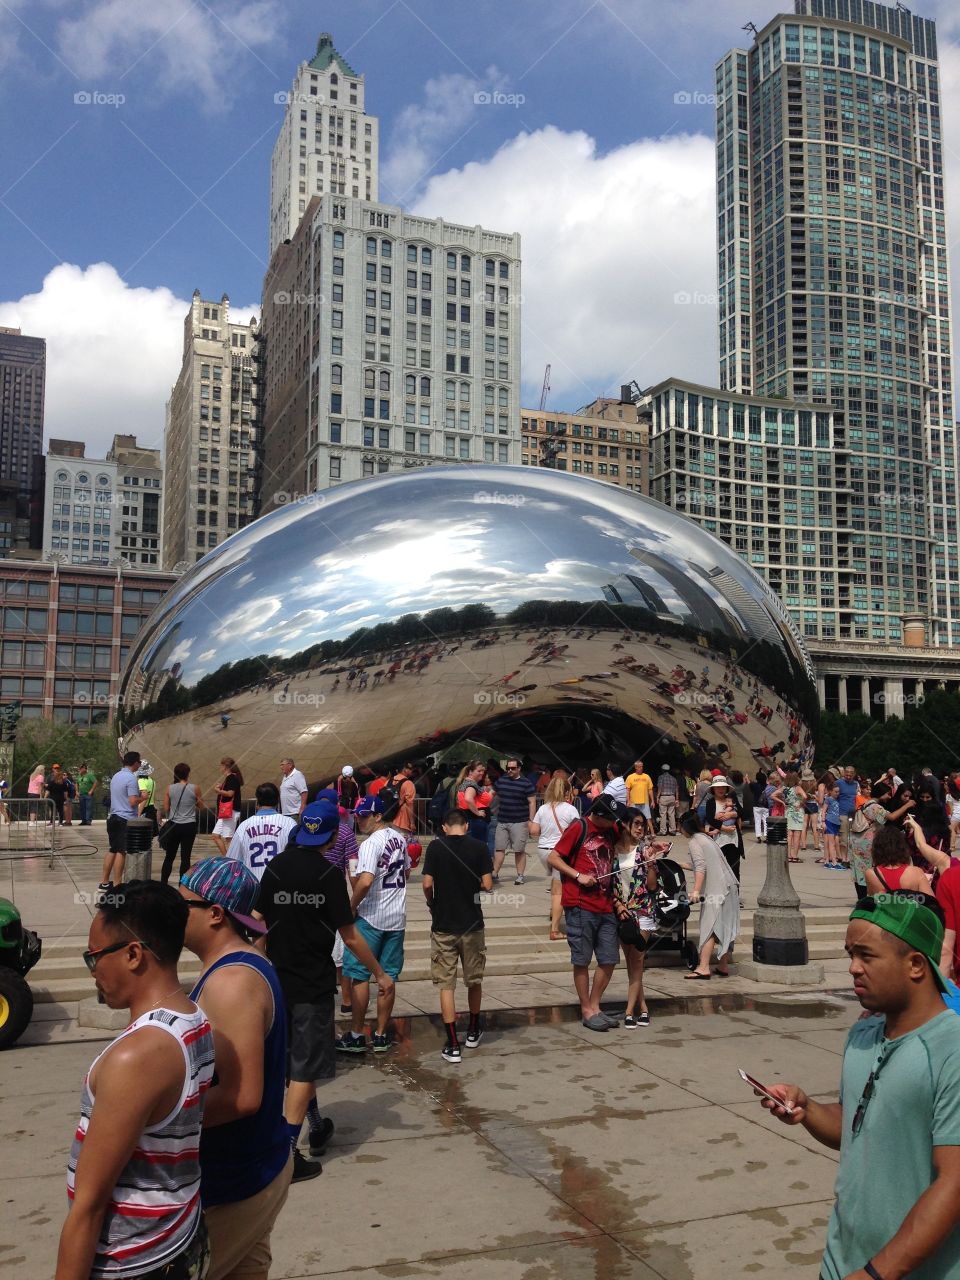 Chicago City . "The Bean" in Chicago! 